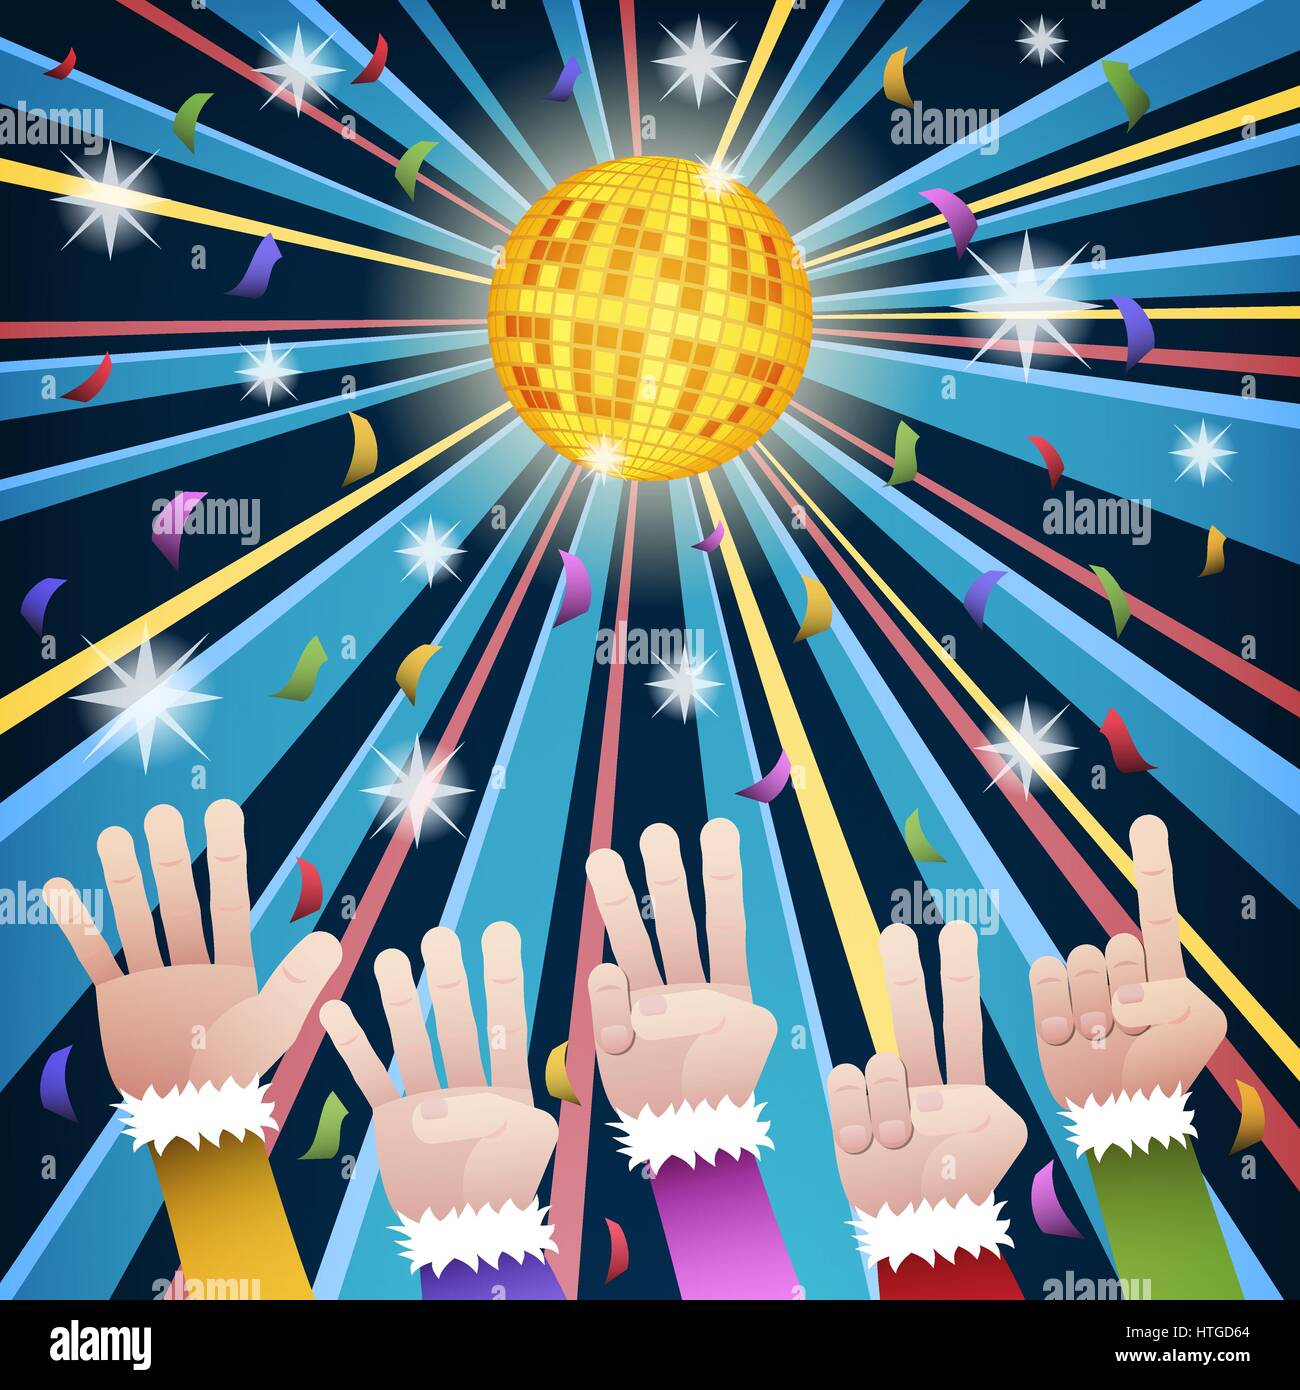 Happy new year countdown disco party with hands count number from five to one, under gold hny 2017 mirror ball and colorful confetti Stock Vector